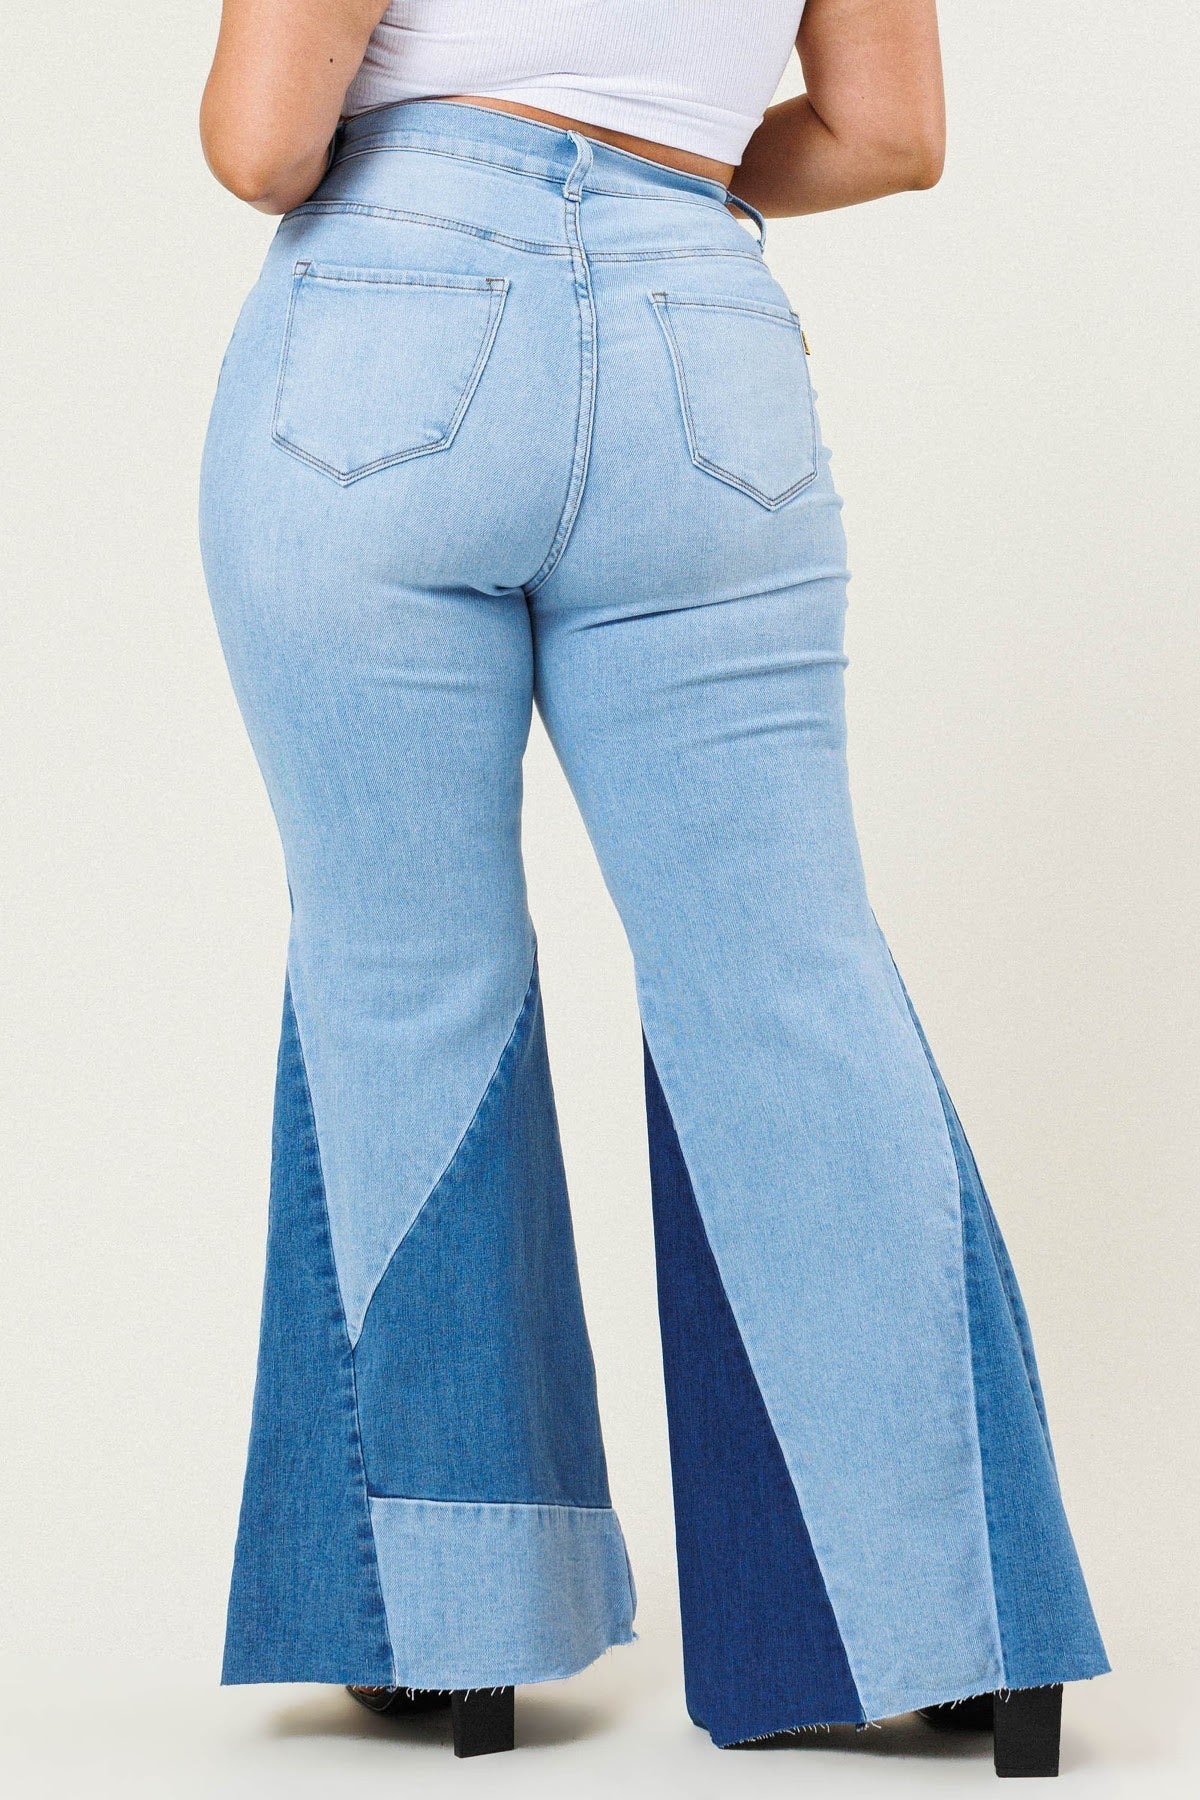 Light Spin The Color-Block Jeans